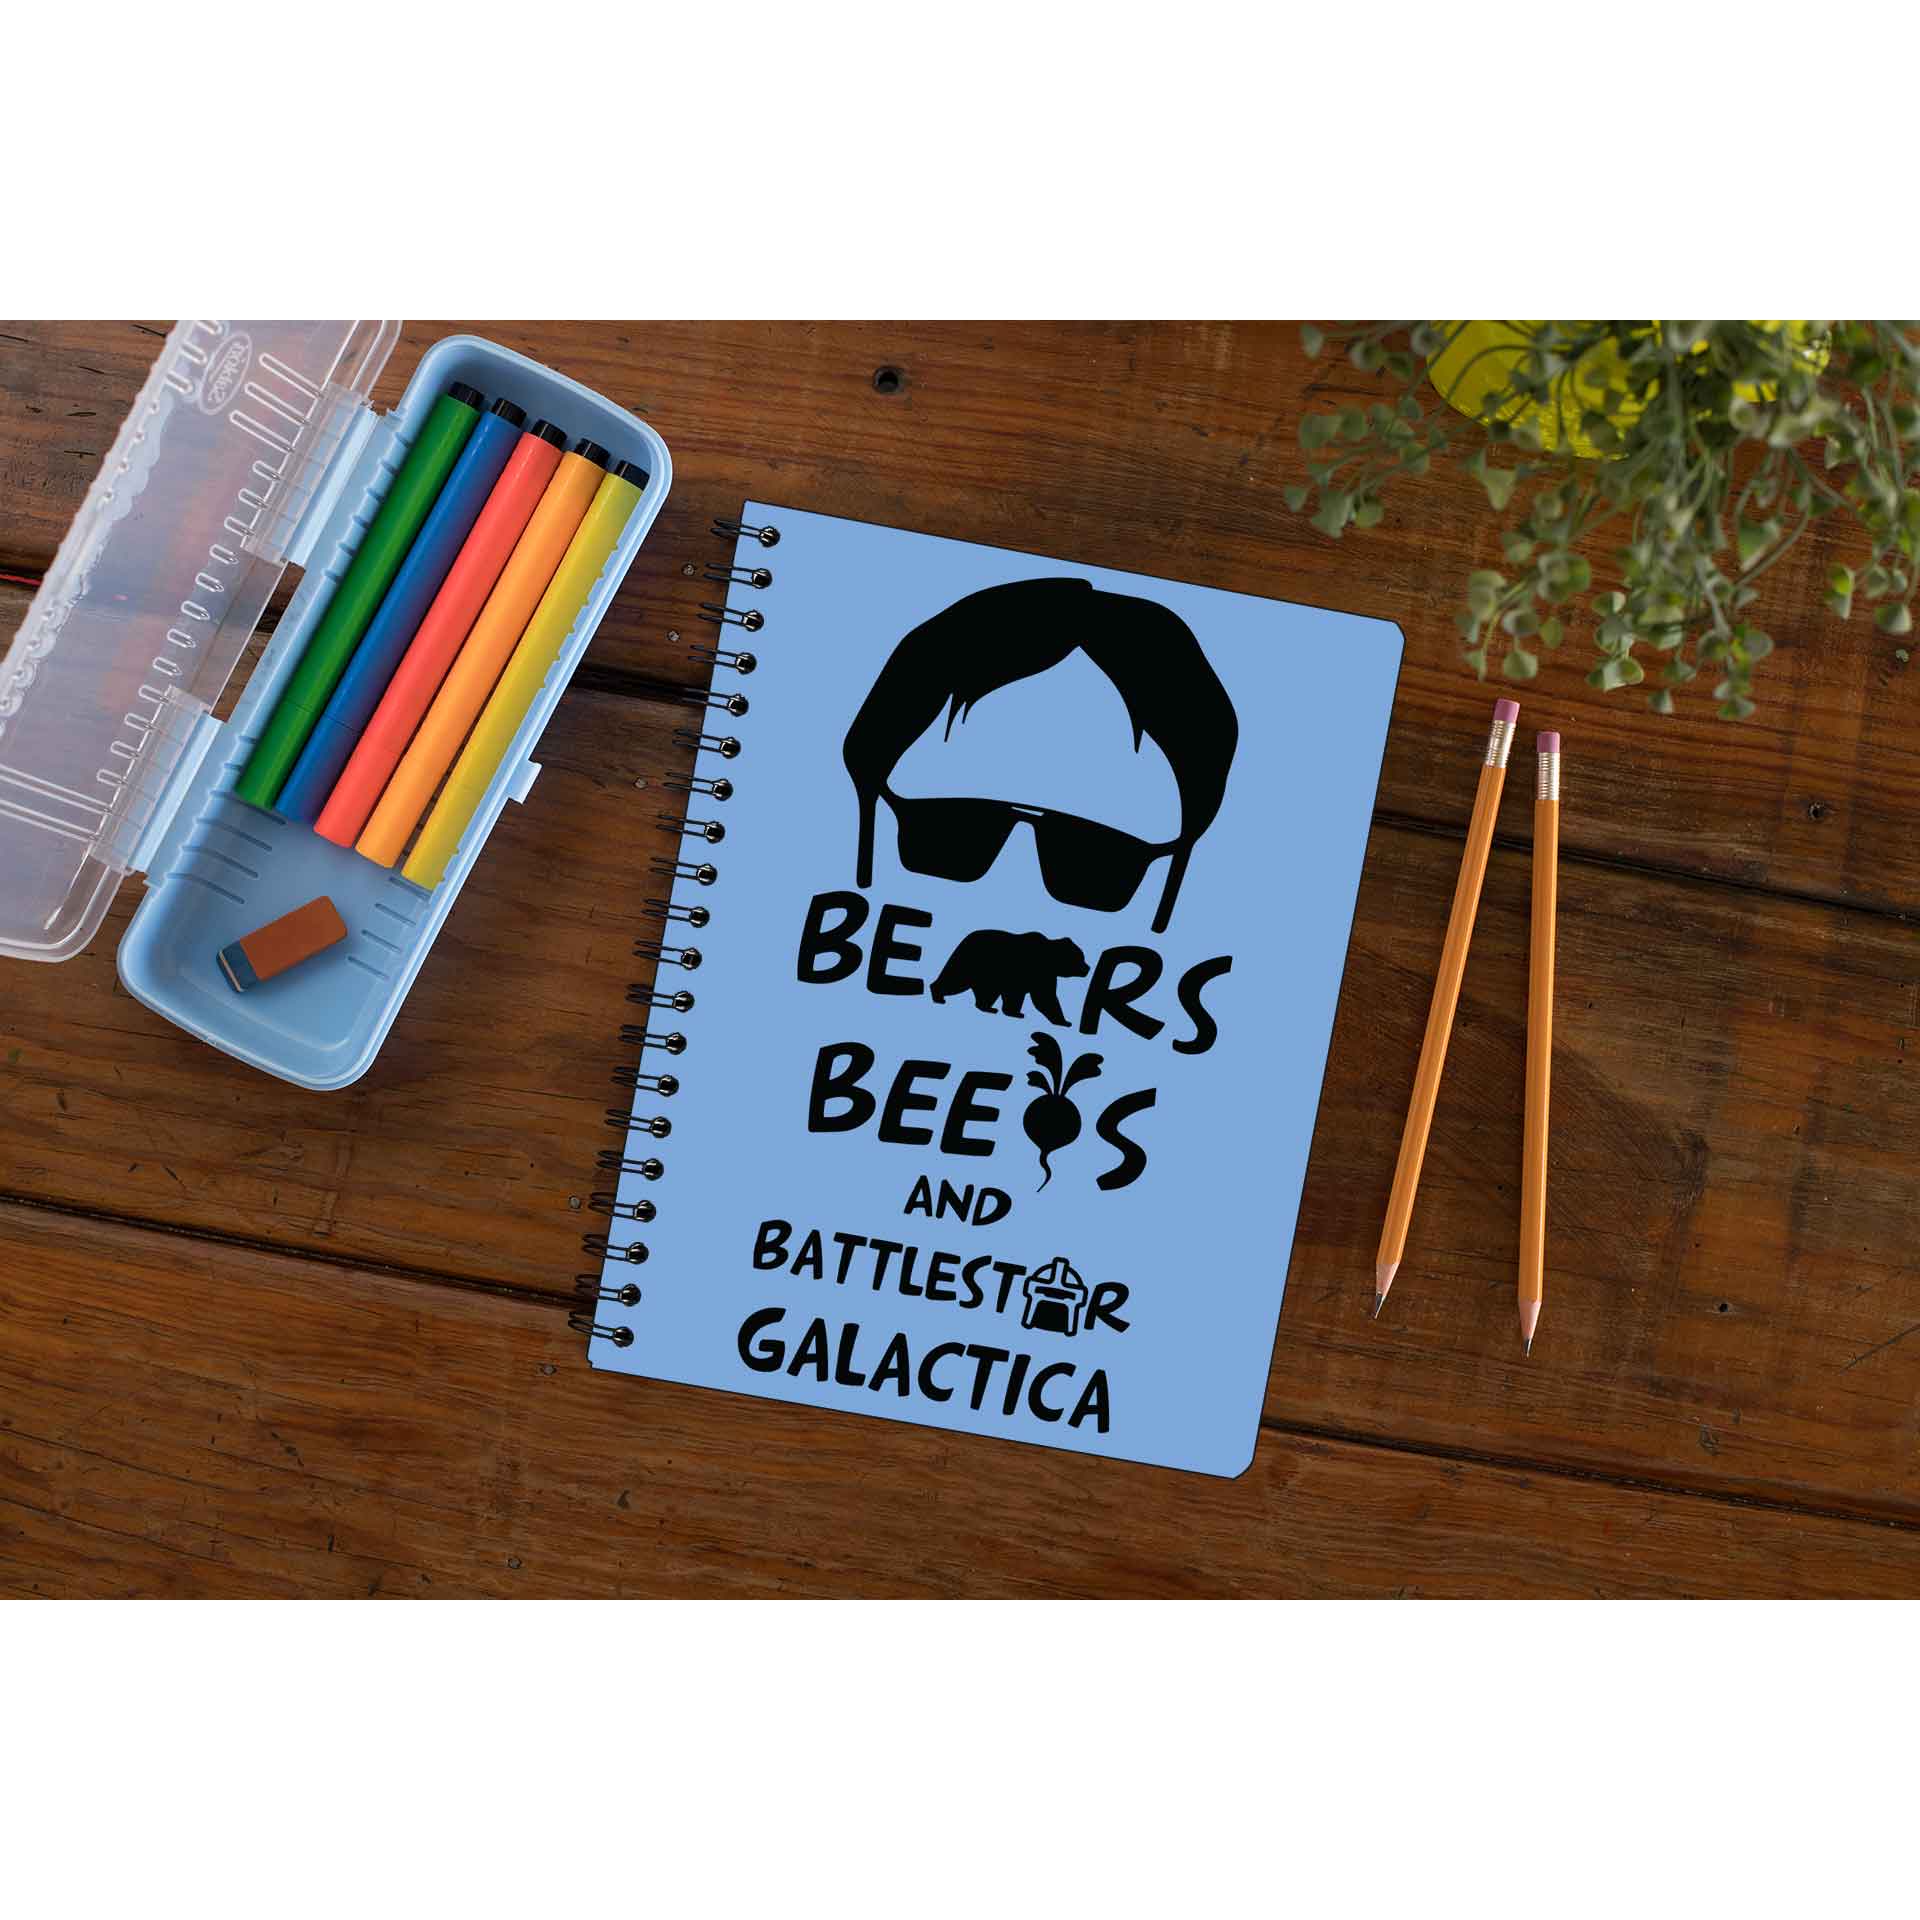 the office bears beets & battlestar galactica notebook notepad diary buy online india the banyan tee tbt unruled - dwight